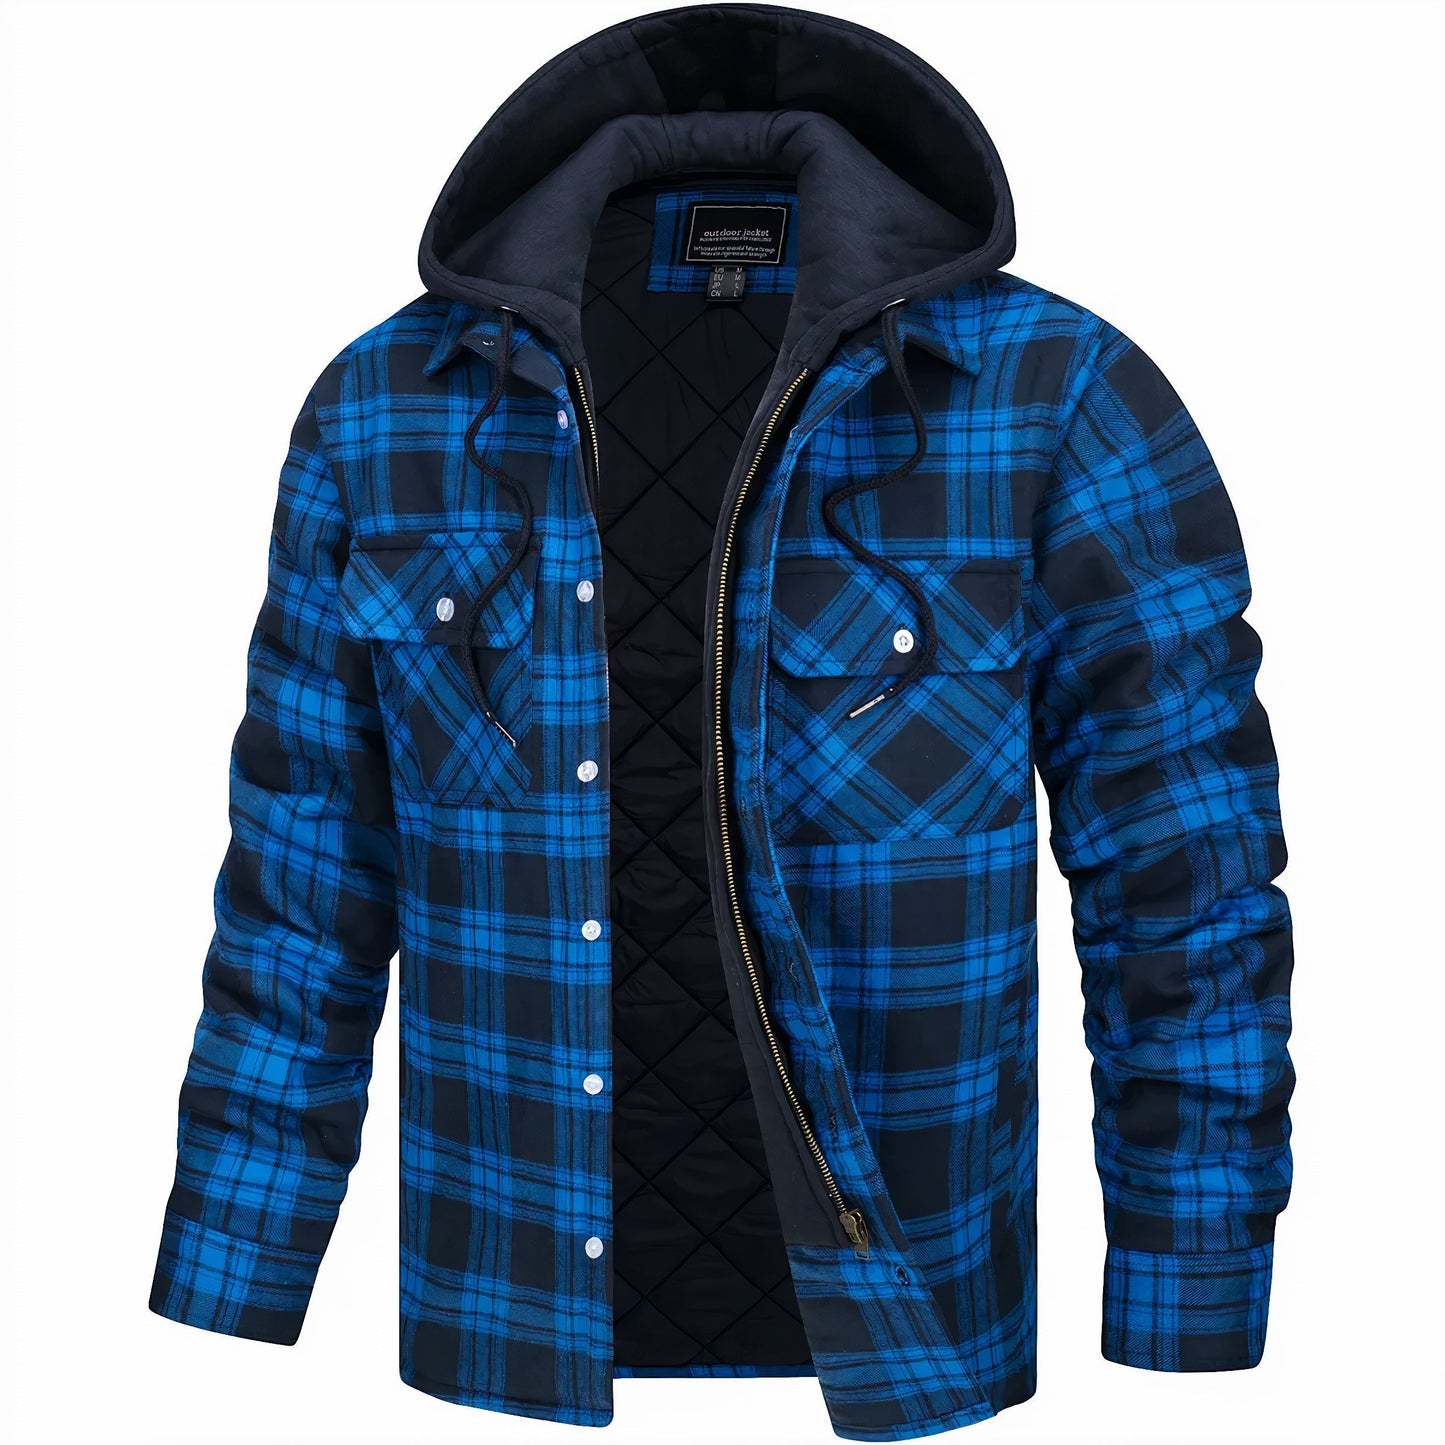 Thomas | Casual Winter Jacket with Hood